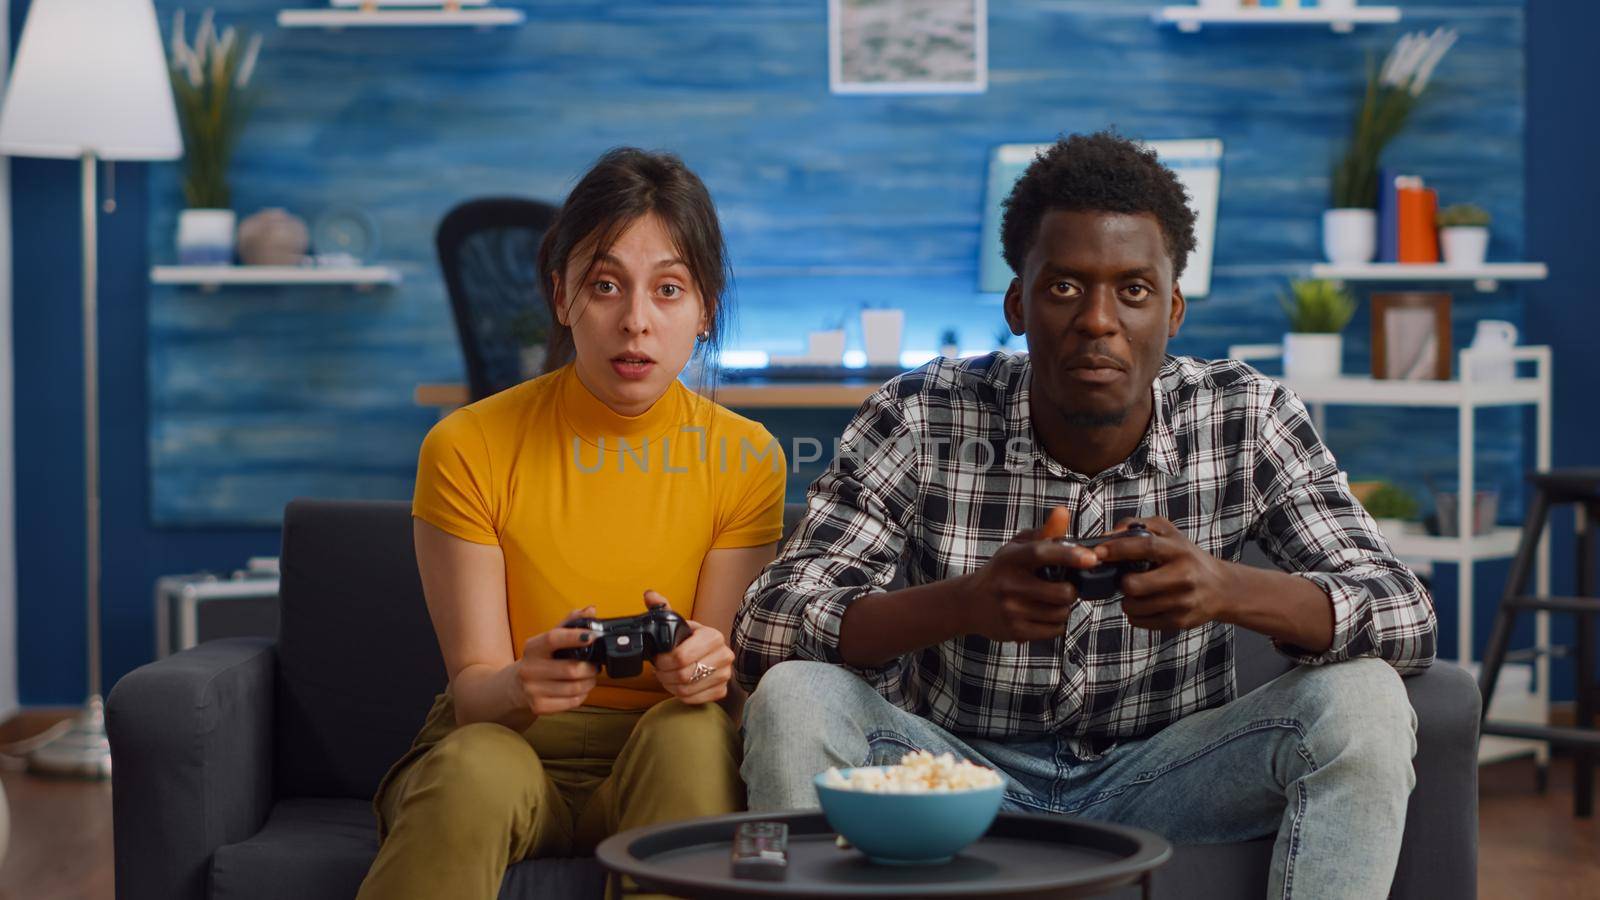 Modern interracial couple playing with joysticks for video game by DCStudio